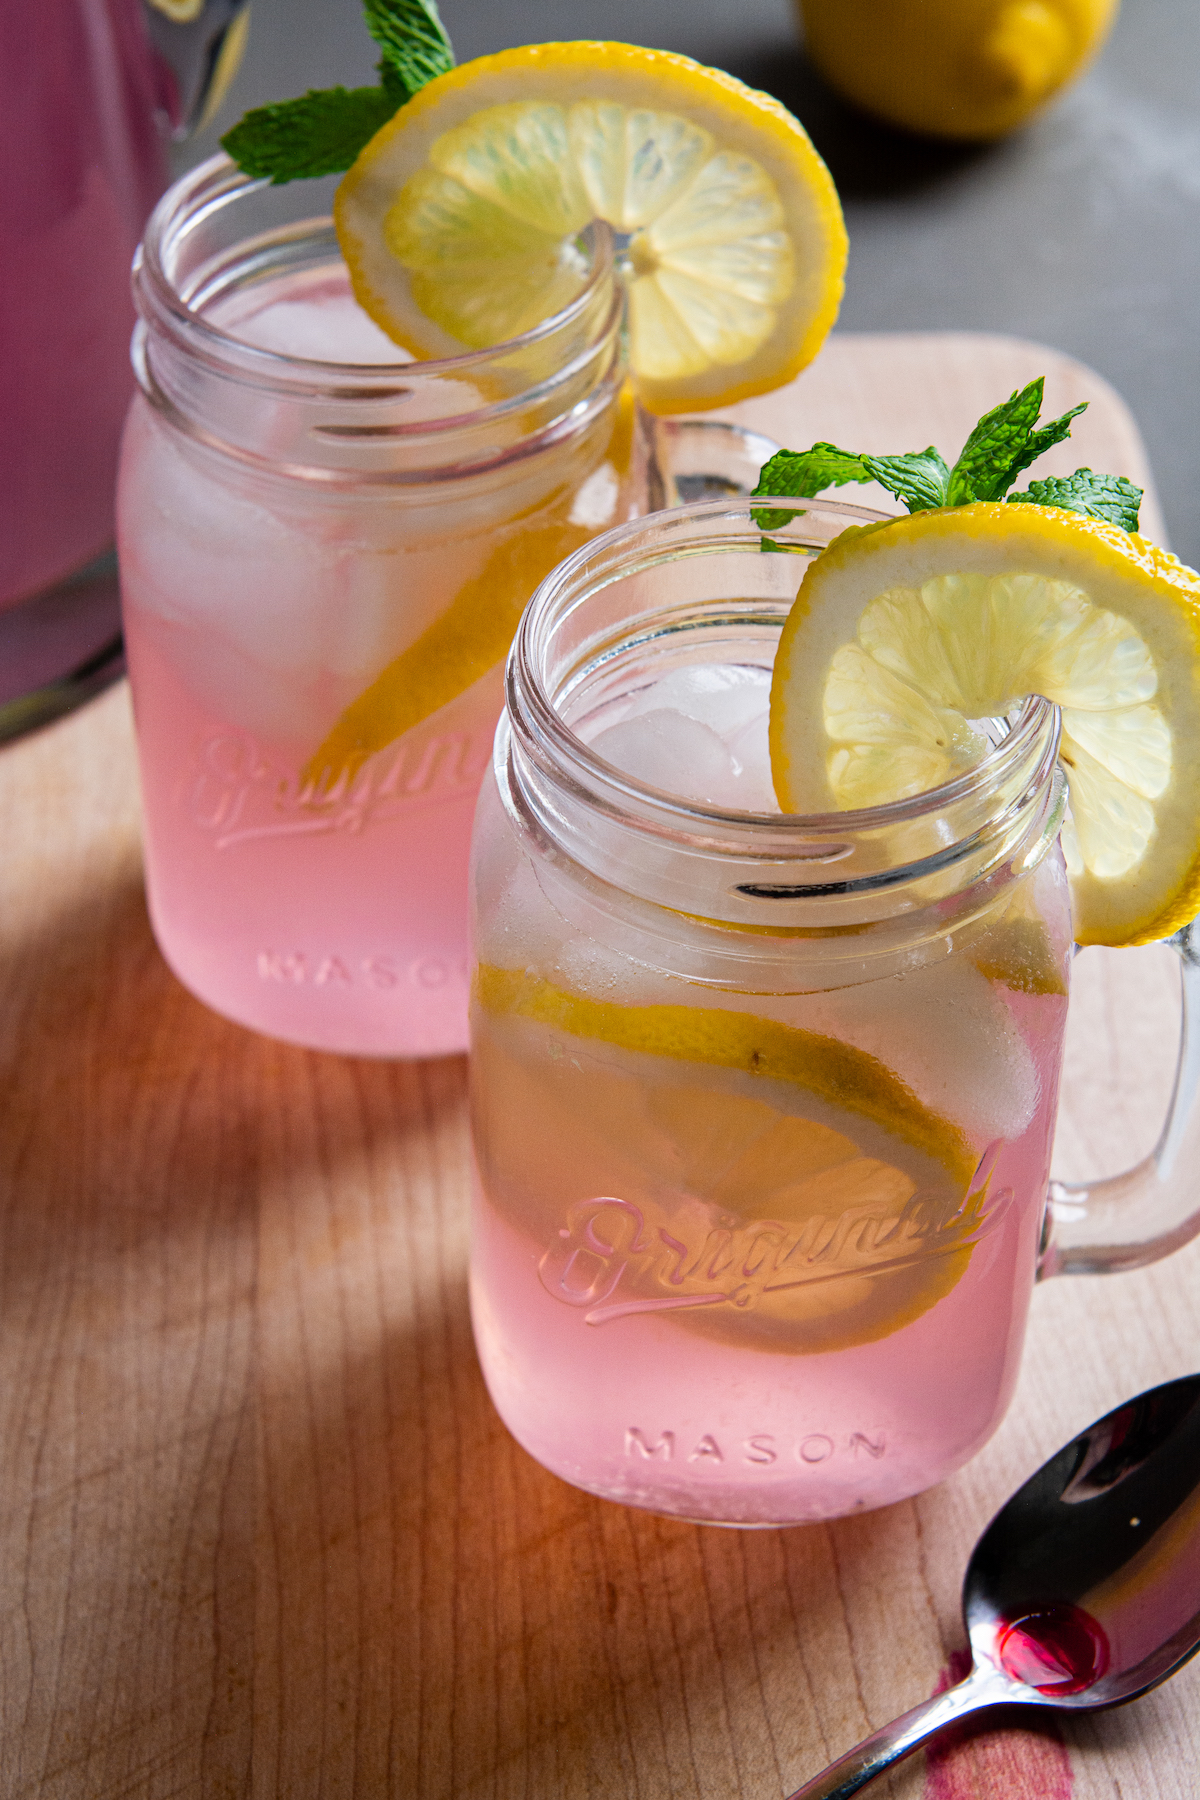 Two glasses of pink lemonade with lemon slices and mint leaves.